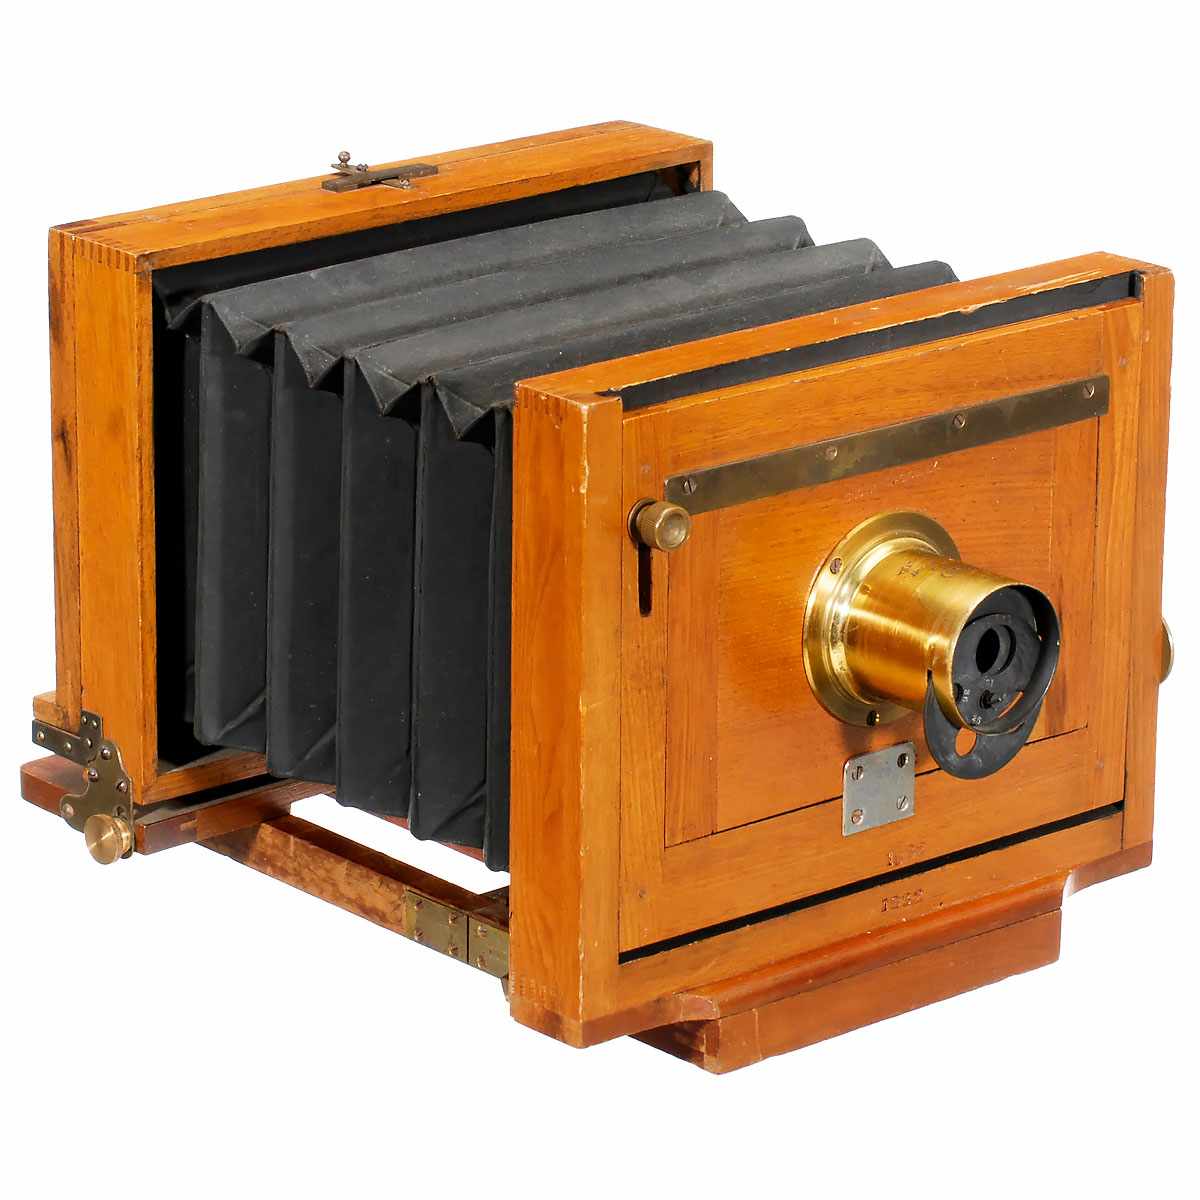 "Waterbury View" 5 x 8 by Scovill USA, 1886 Scovill Manufacturing Co. NY. Field camera, light wood